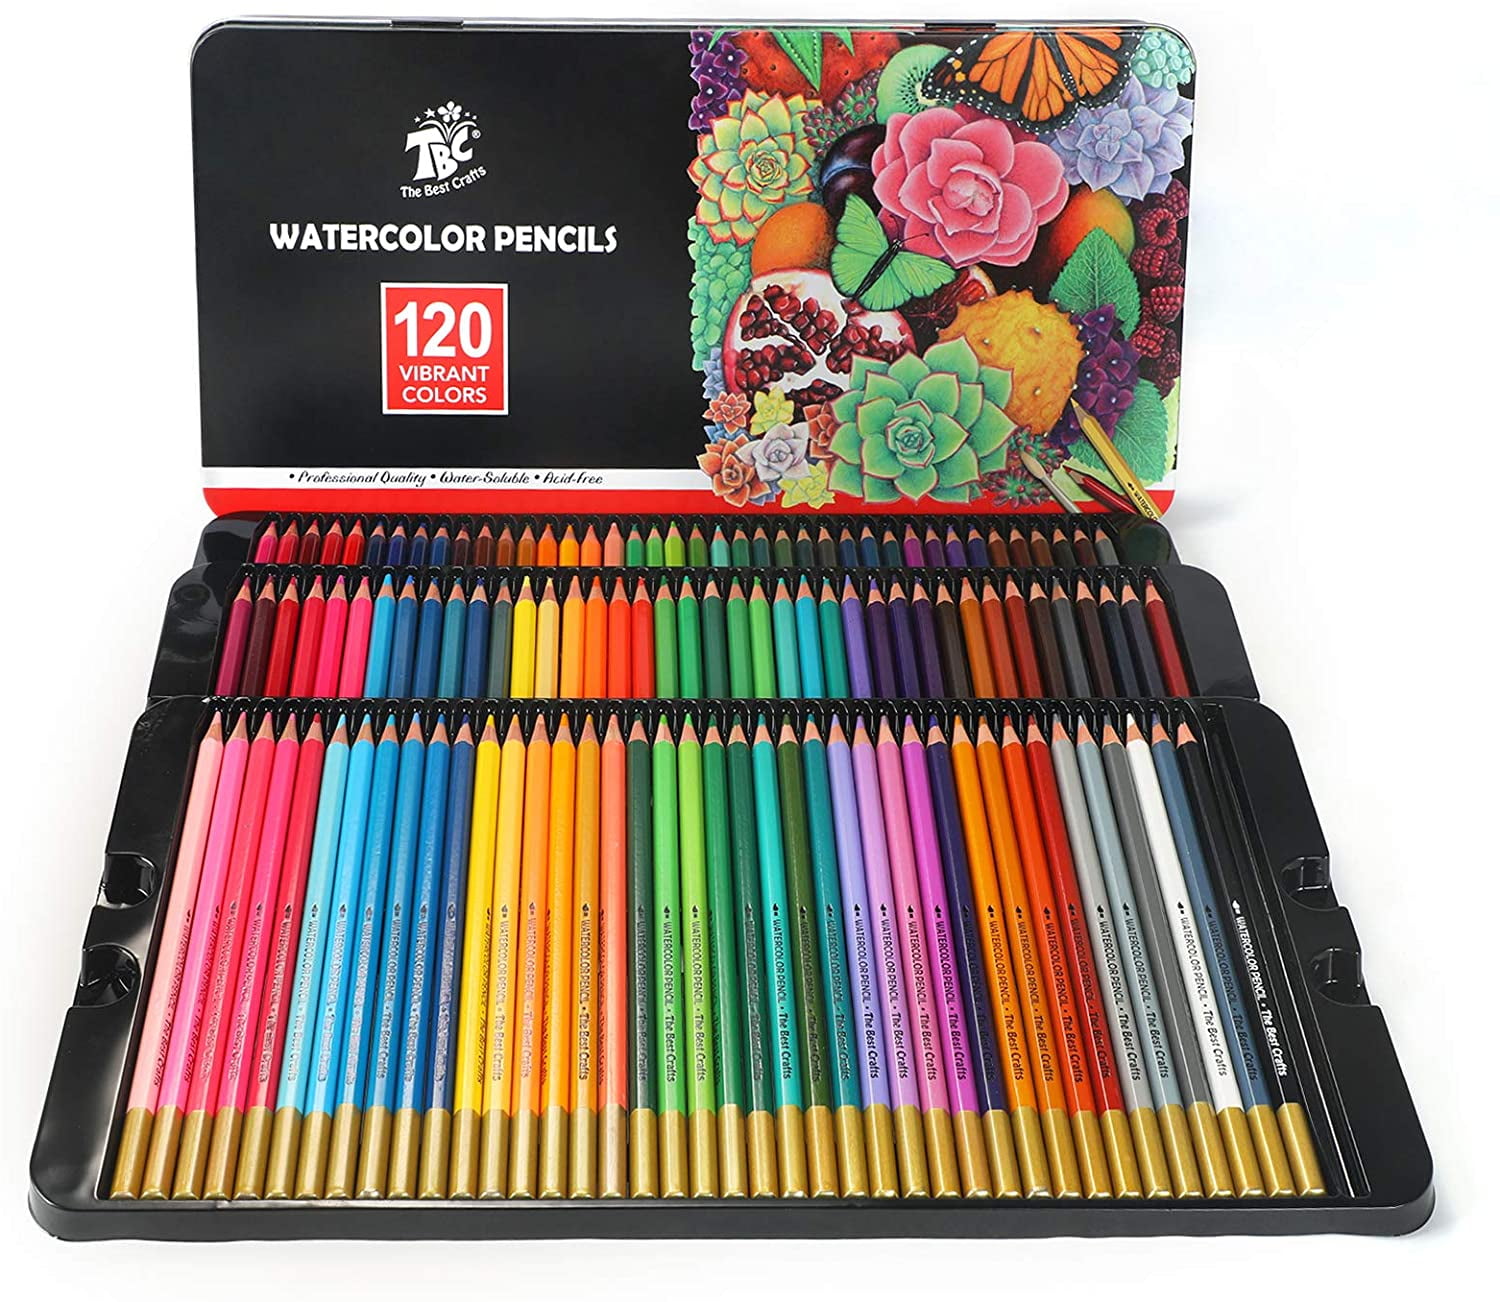  Bundle of Arrtx Professional 126 Colors Colored Pencils with MeiLiang  Watercolor Paint Set, 36 Vivid Colors Perfect for Students, Kids, Beginners  and More : Arts, Crafts & Sewing